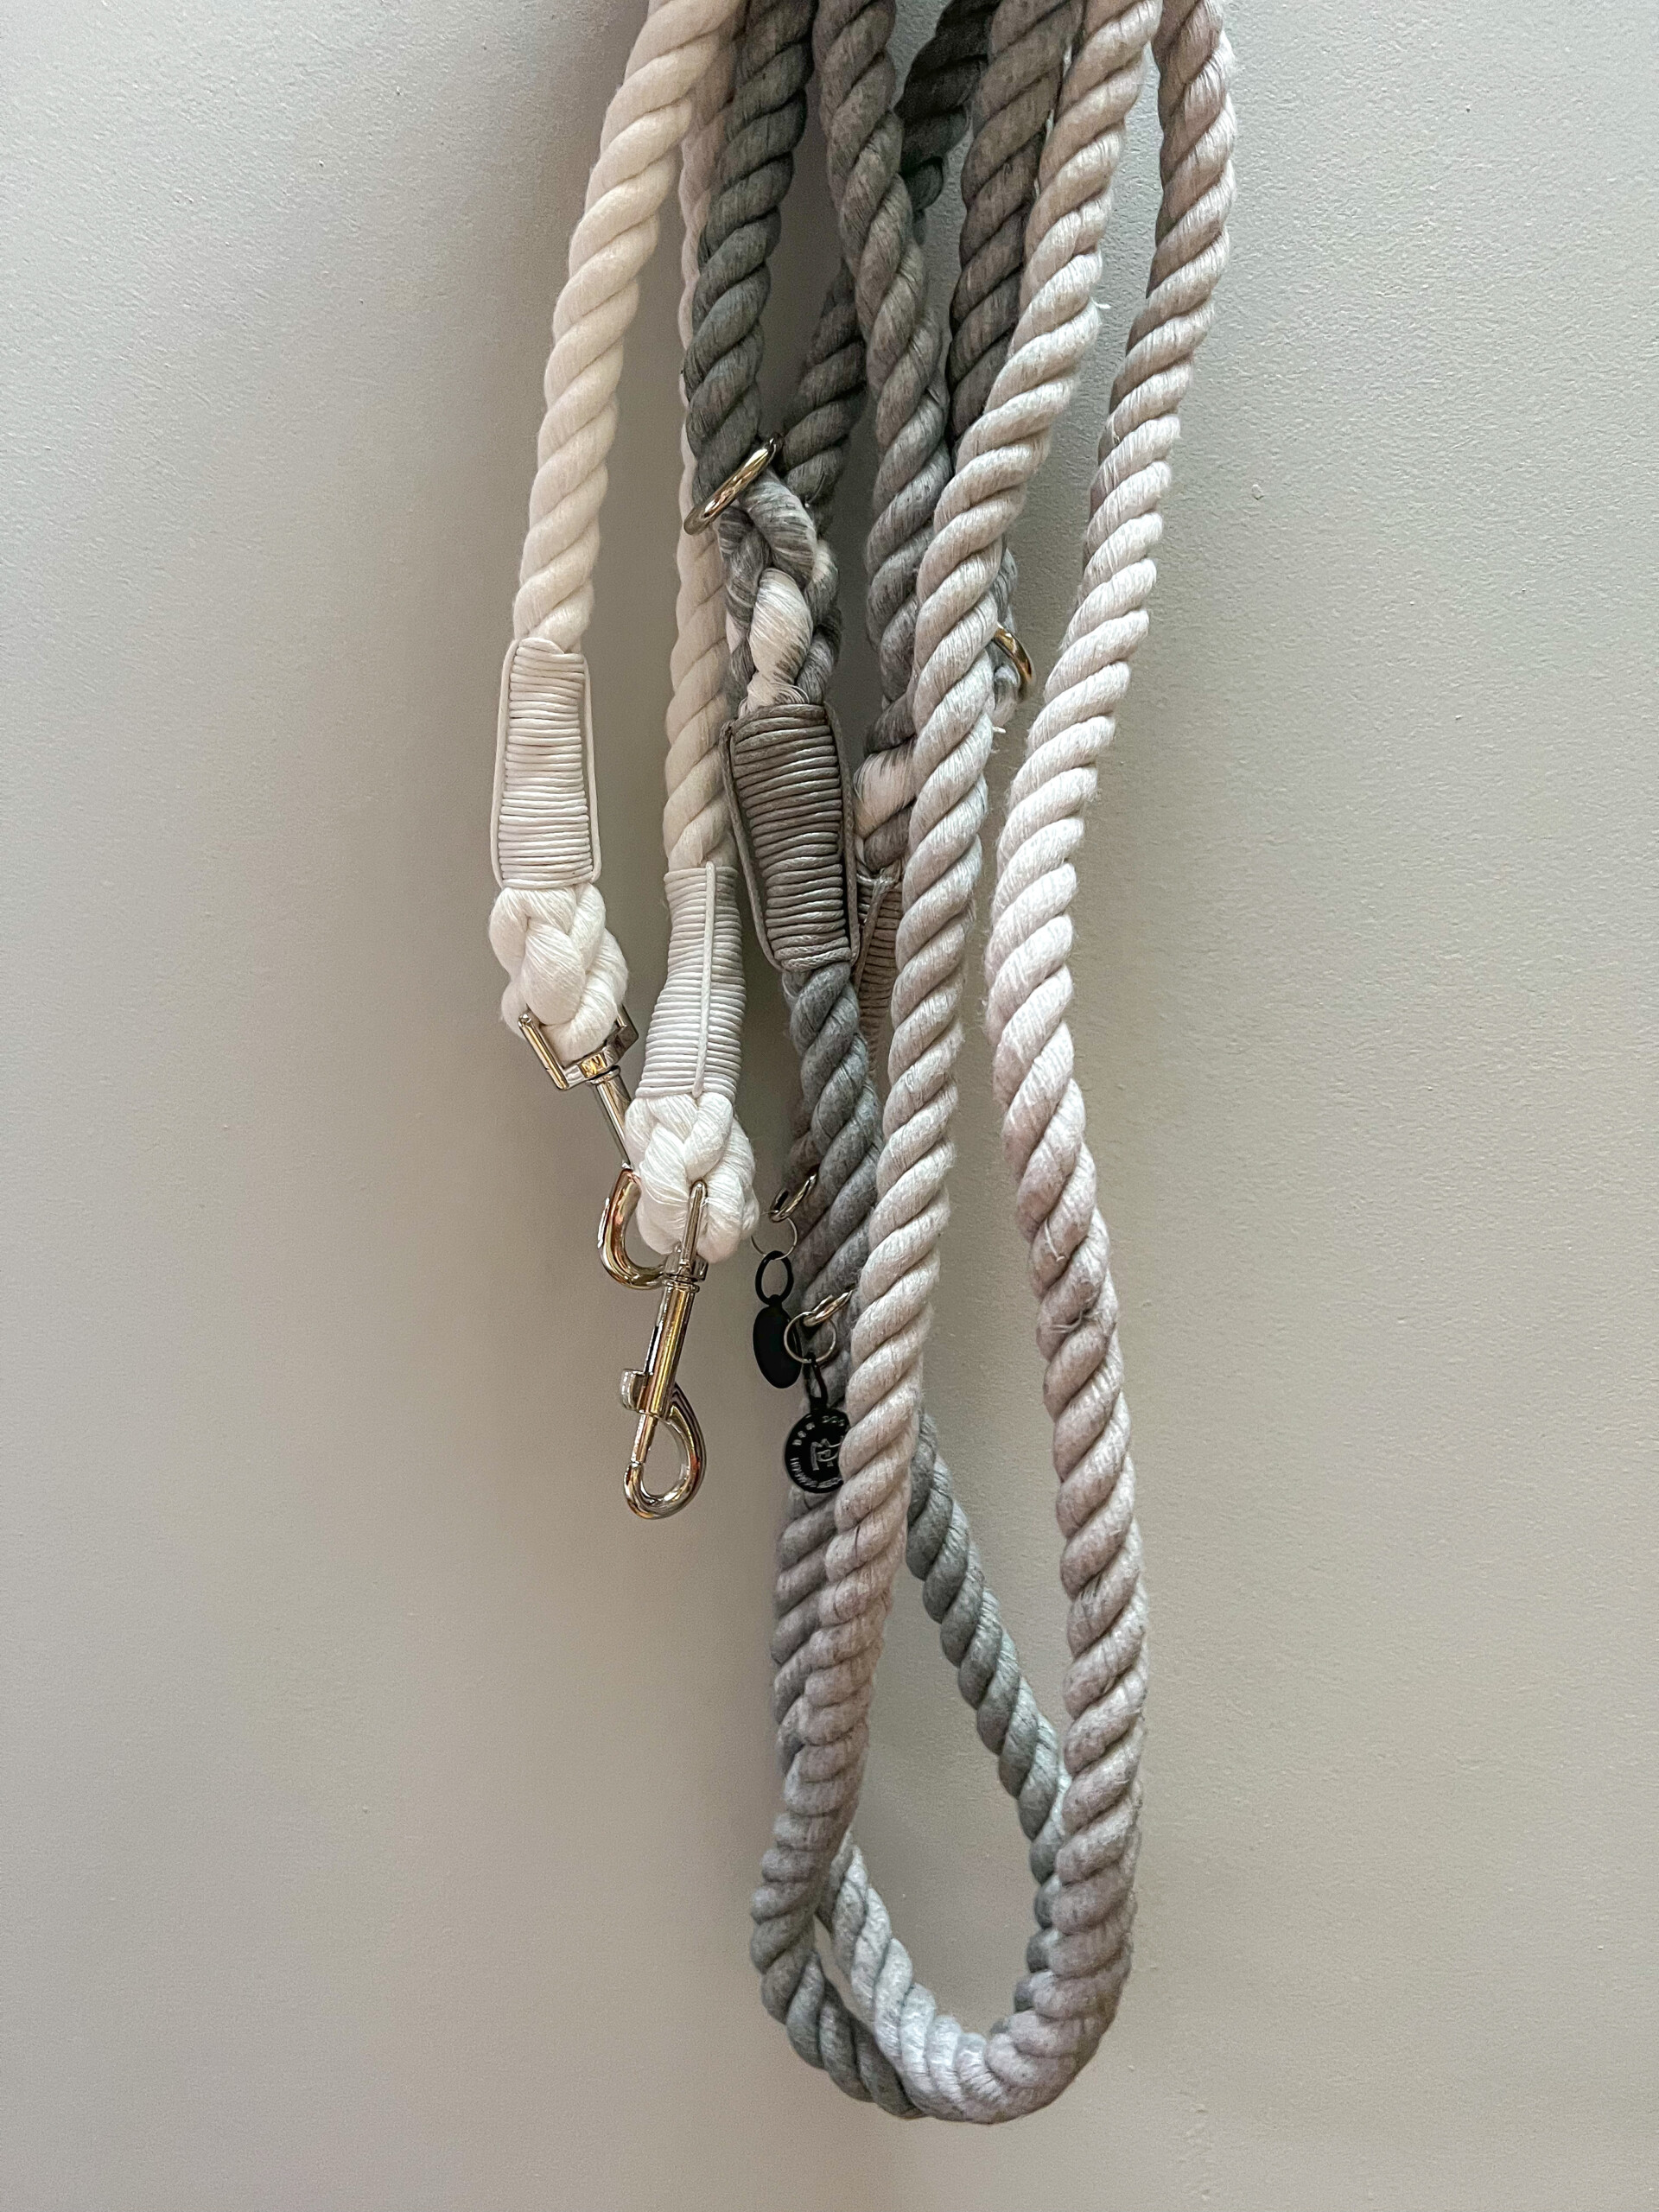 A grey ombre luxury rope lead, being held by a woman with deep and dark red painted nails against a grey painted wall